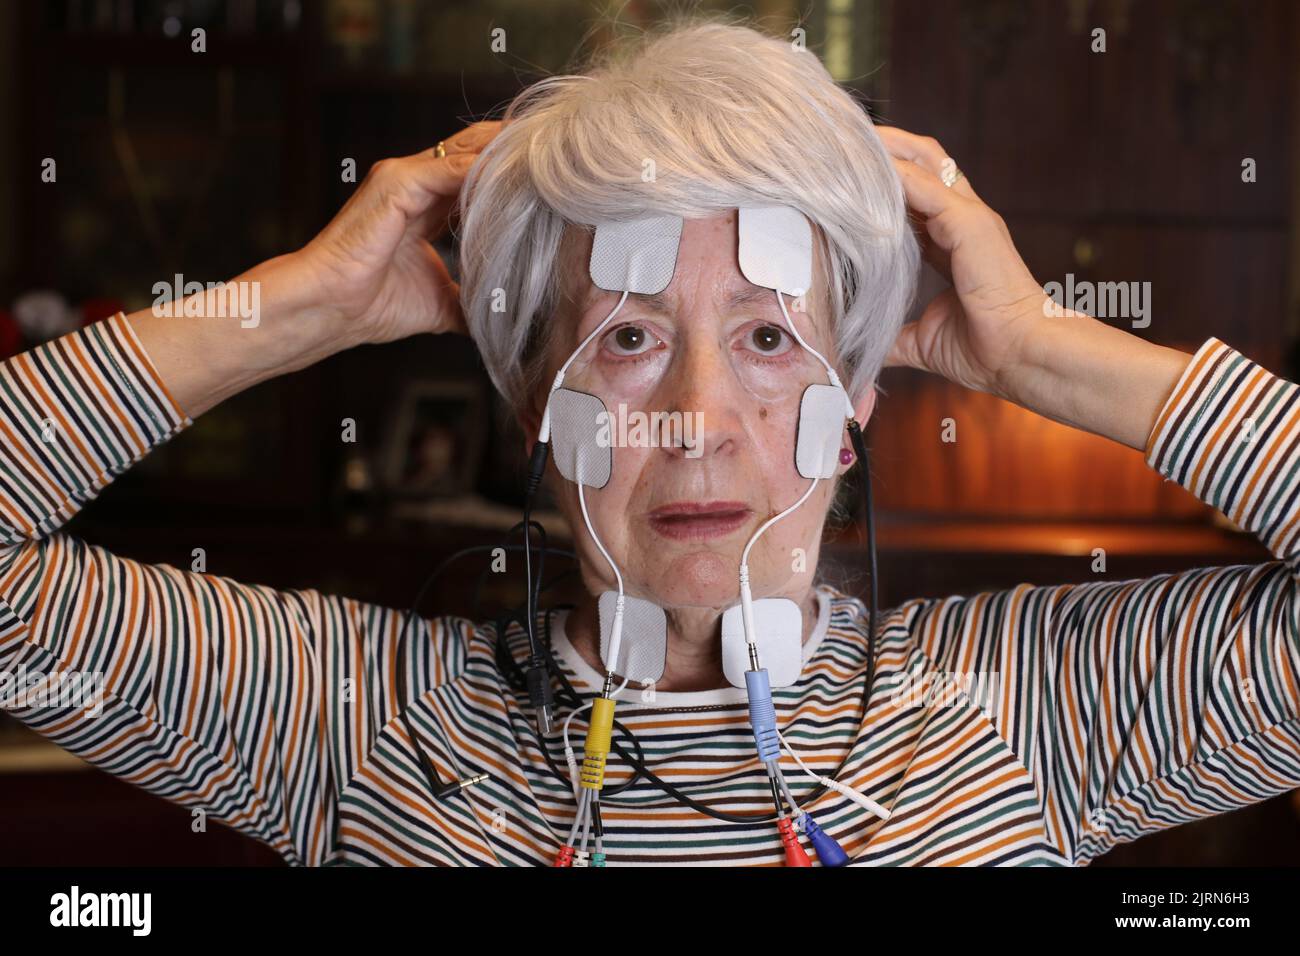 Lady trying alternative therapy with electro stimulation Stock Photo